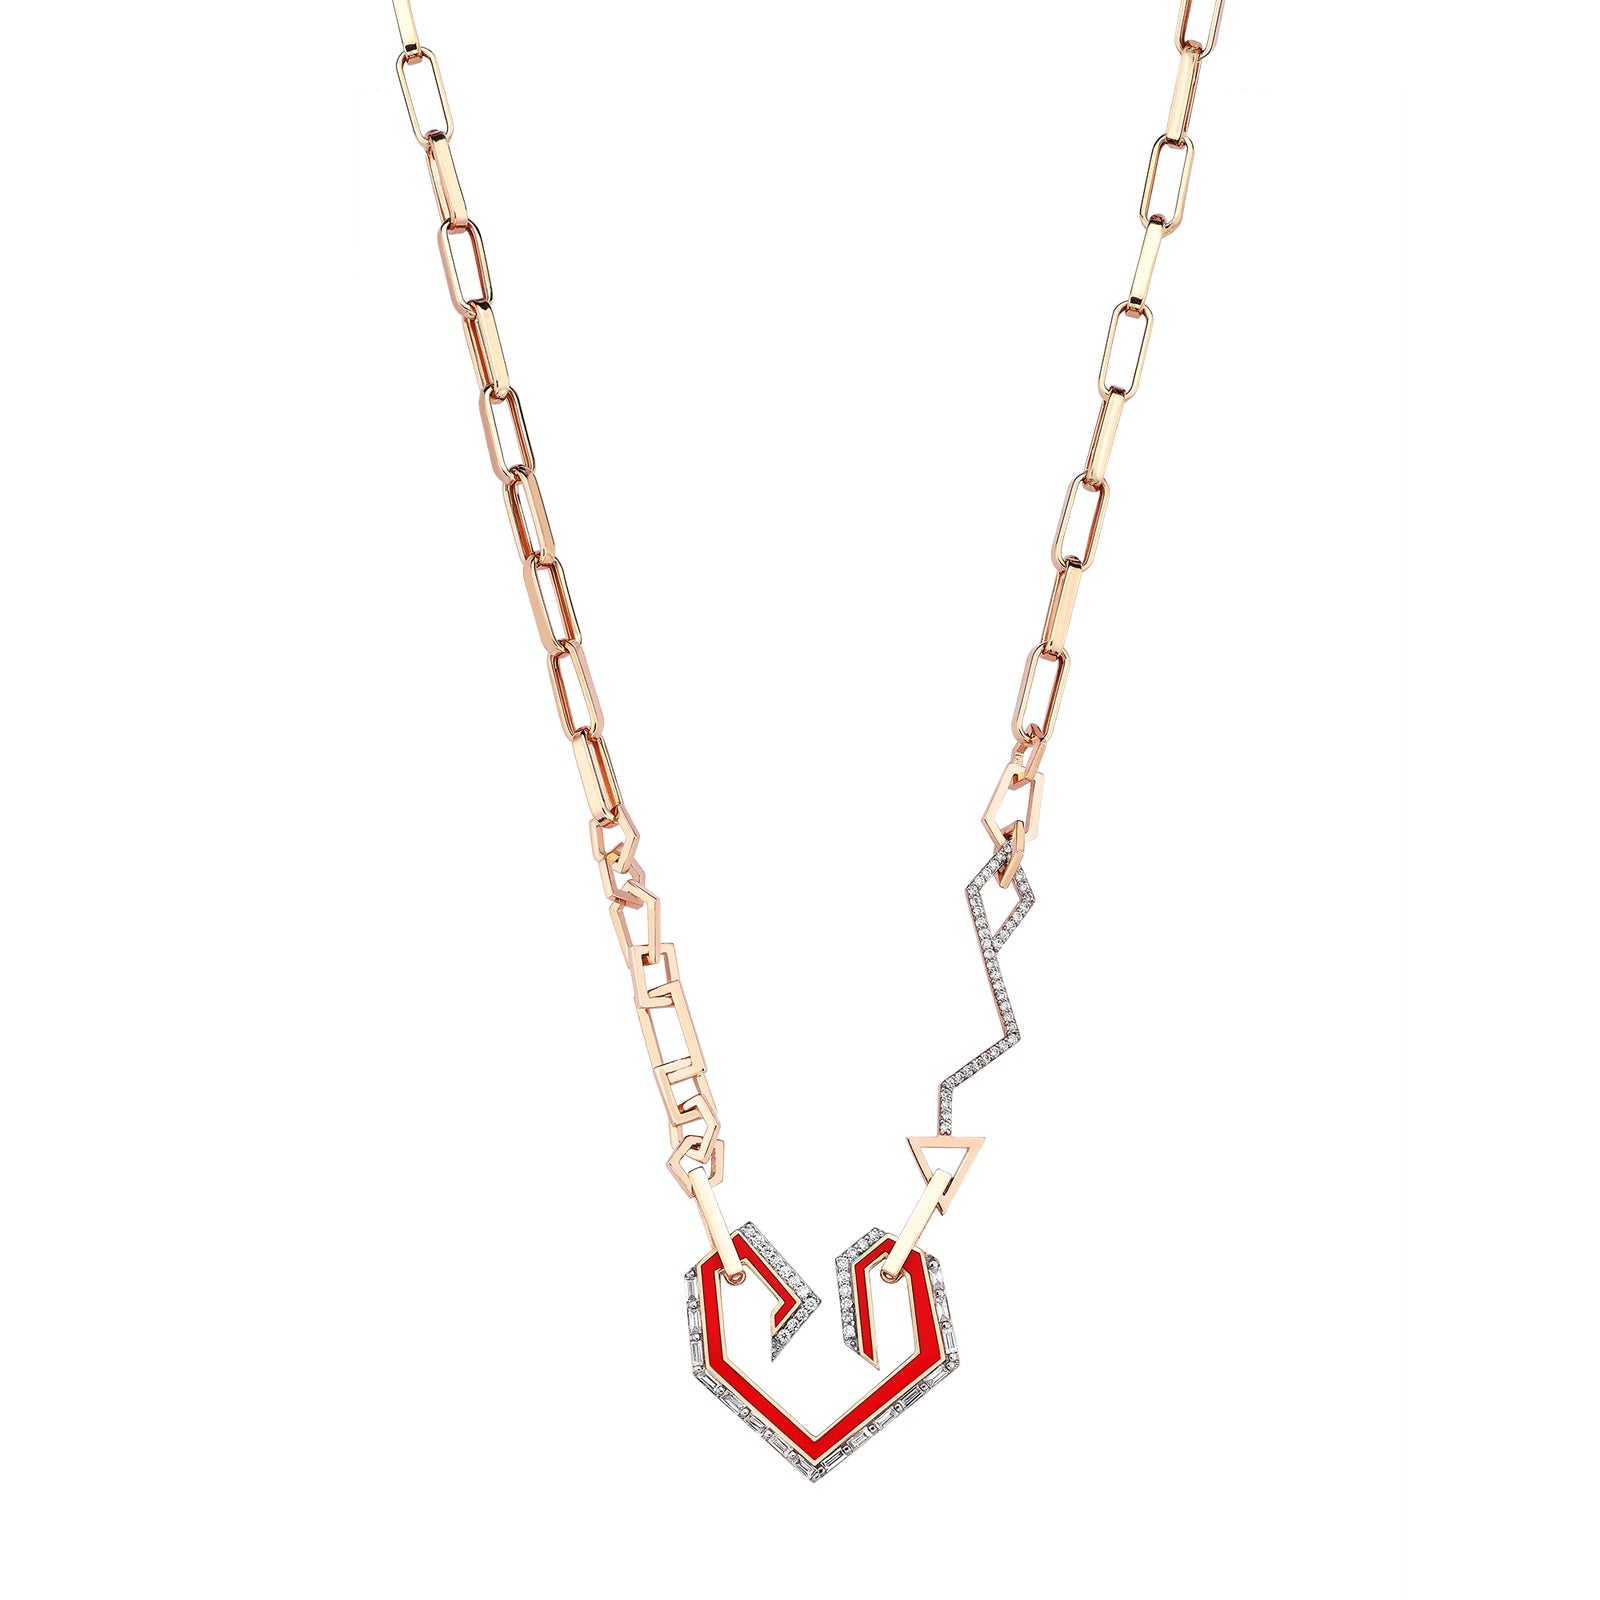 Afecto Necklace Roslow Gold / White Brilliant Diamond and Red Ceramic